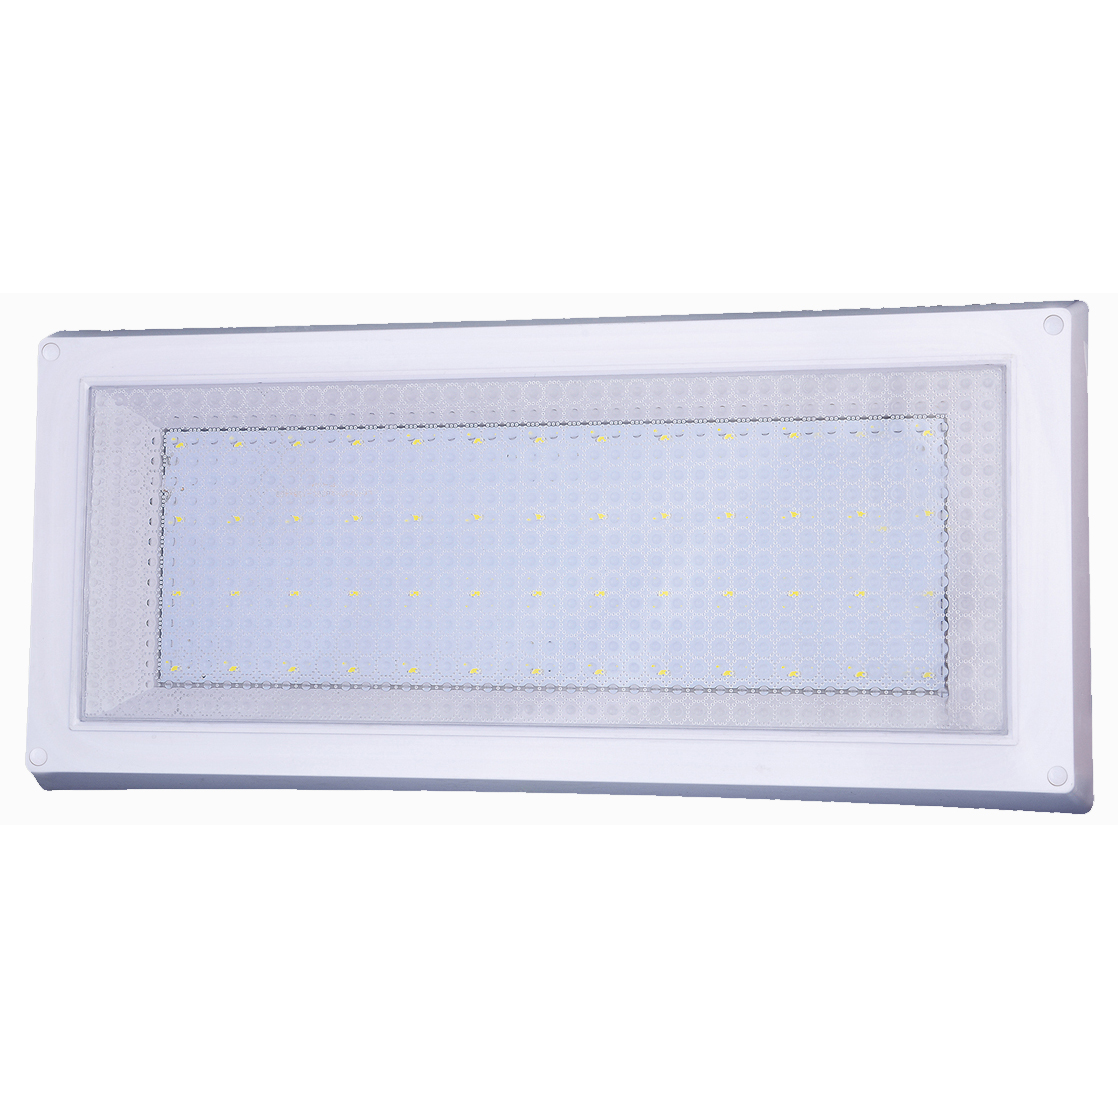 SMD5730 square LED kitchen & bath lamp surface mounted